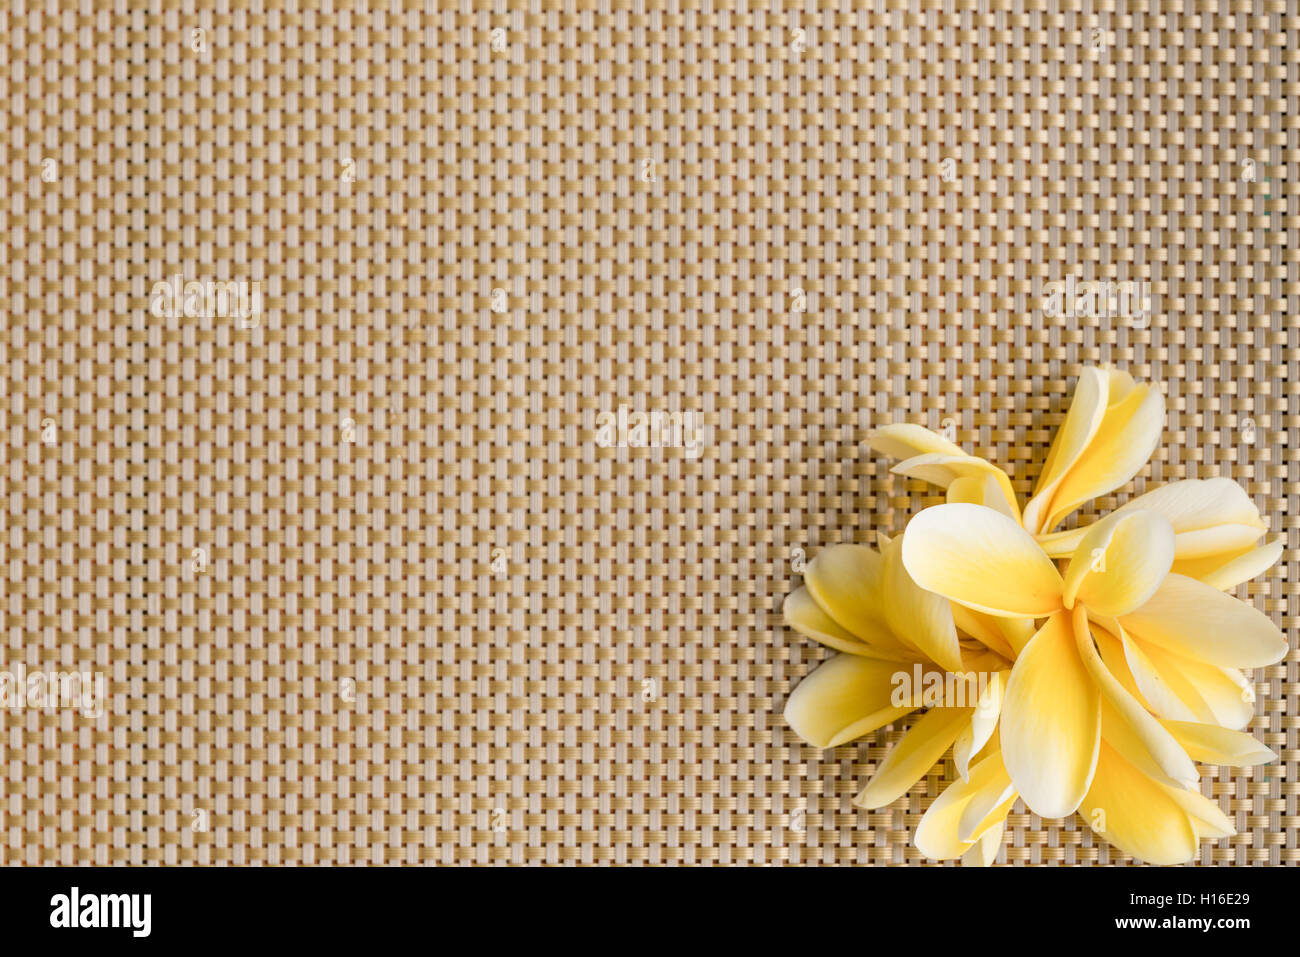 Yellow frangipani / plumeria on placemat background with copy space Stock Photo